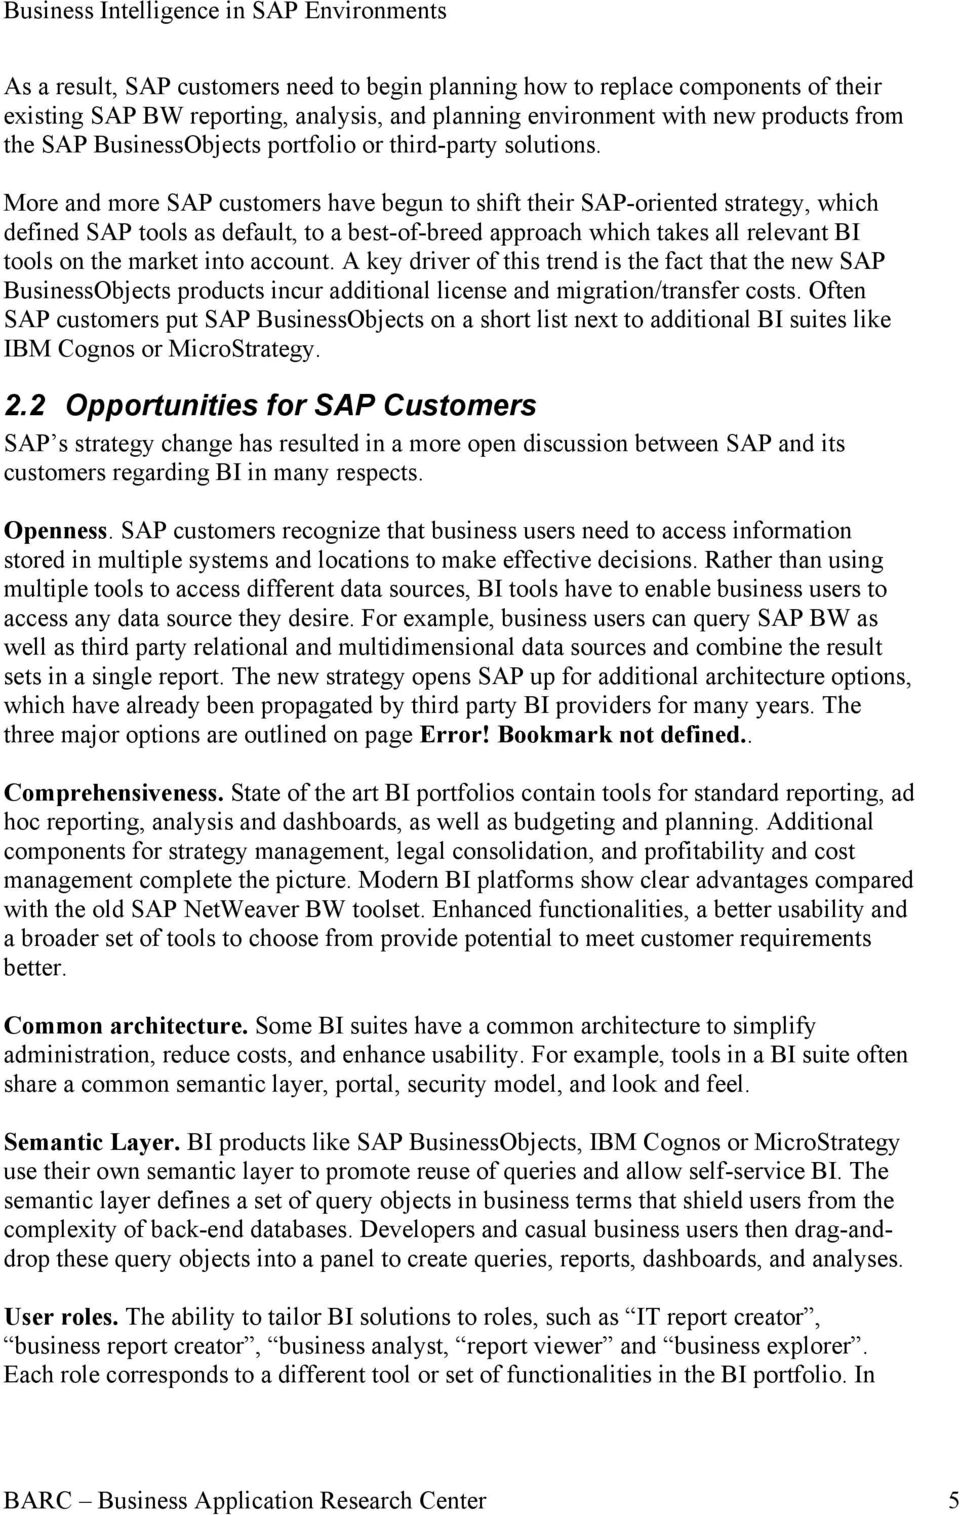 More and more SAP customers have begun to shift their SAP-oriented strategy, which defined SAP tools as default, to a best-of-breed approach which takes all relevant BI tools on the market into